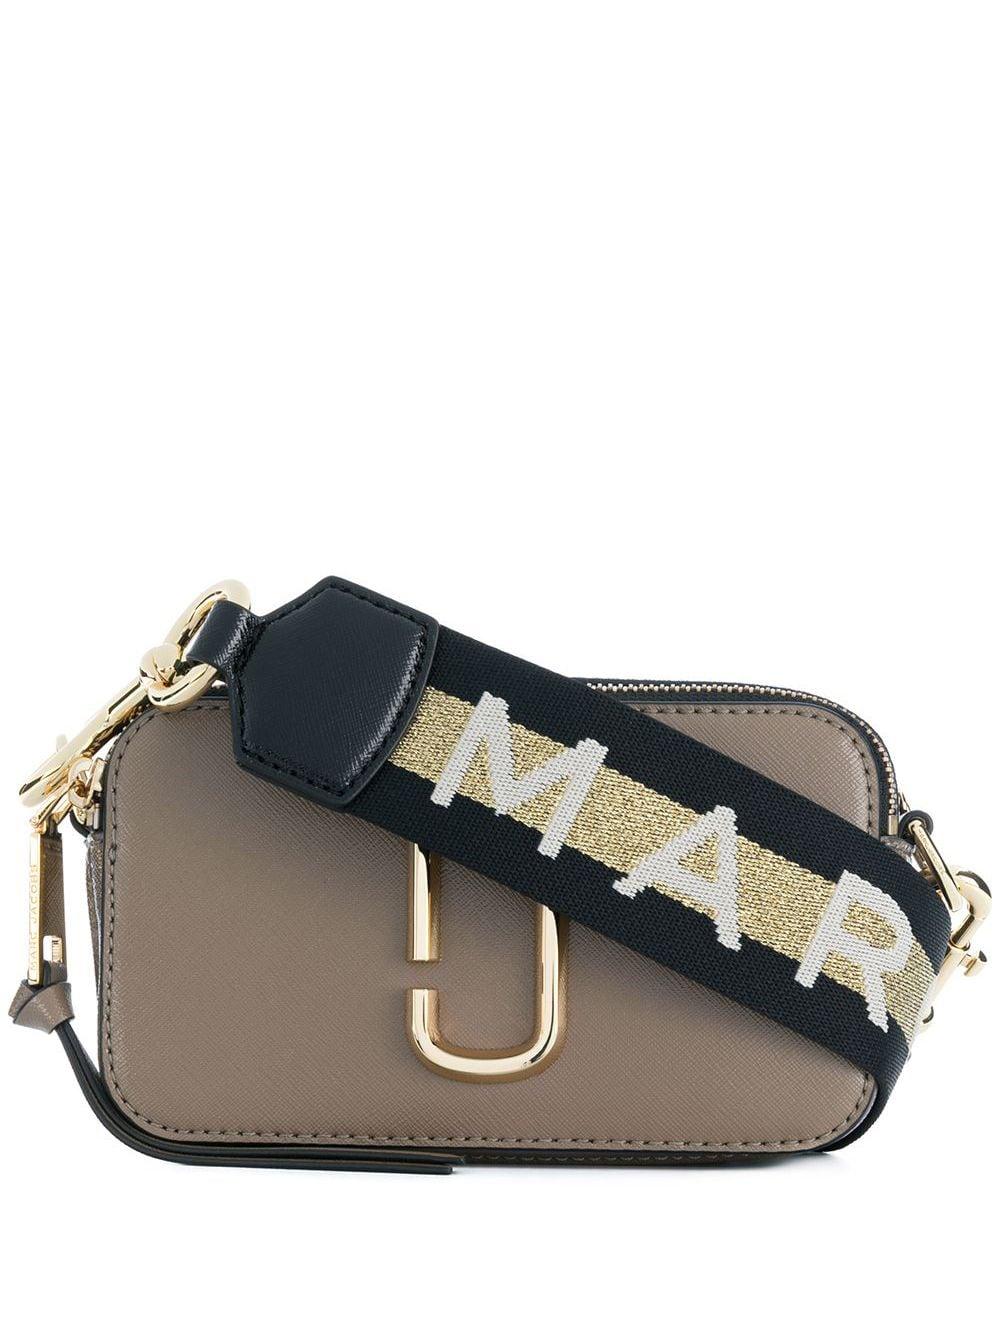 Marc Jacobs Leather Snapshot Mj Cross Body Bag in French Grey (Grey ...